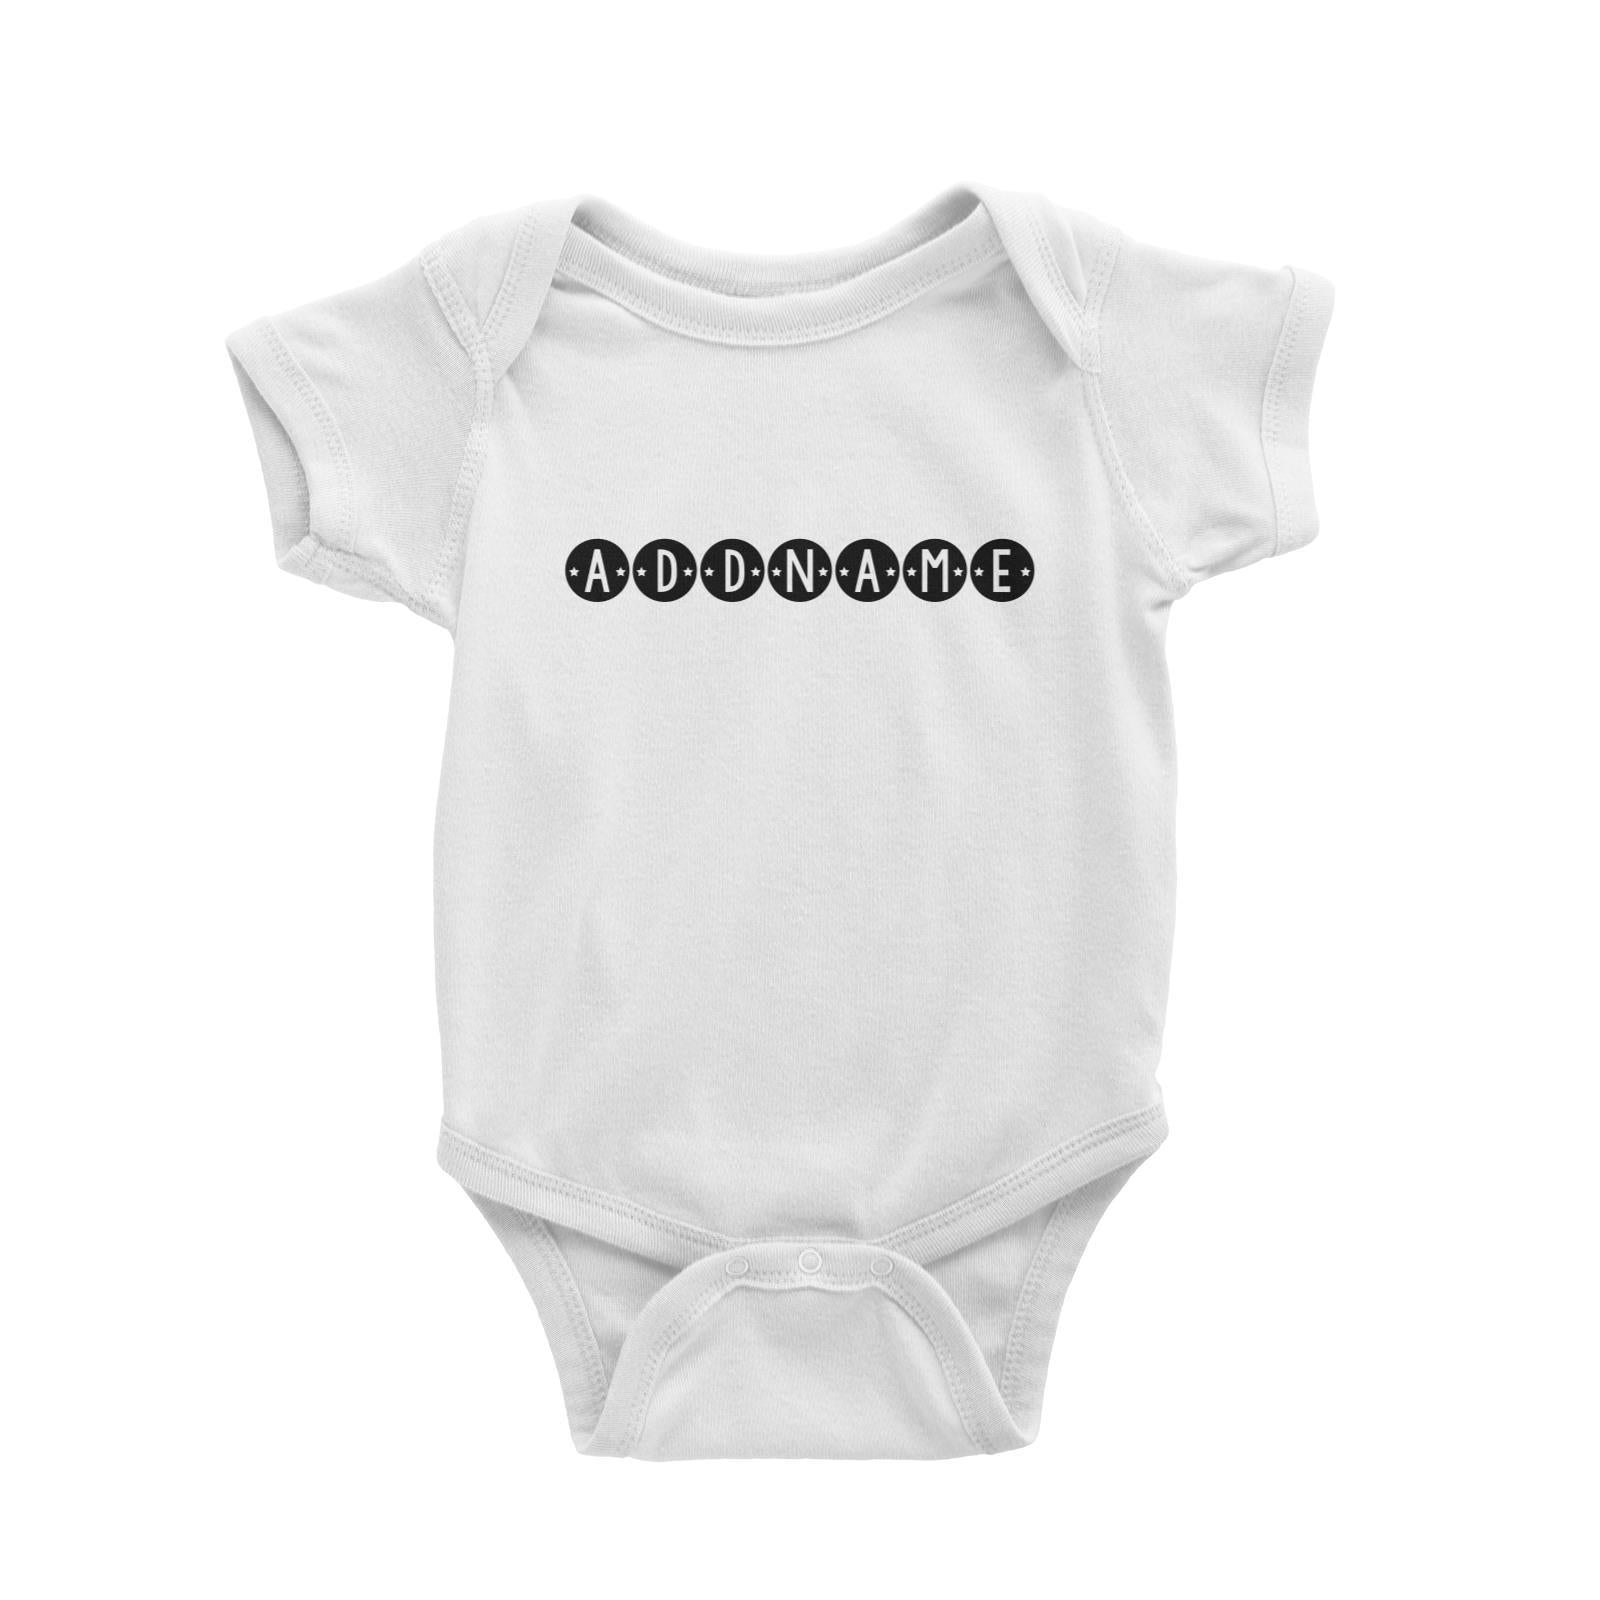 Baby Addname in Circles Baby Romper Personalizable Designs Basic Newborn